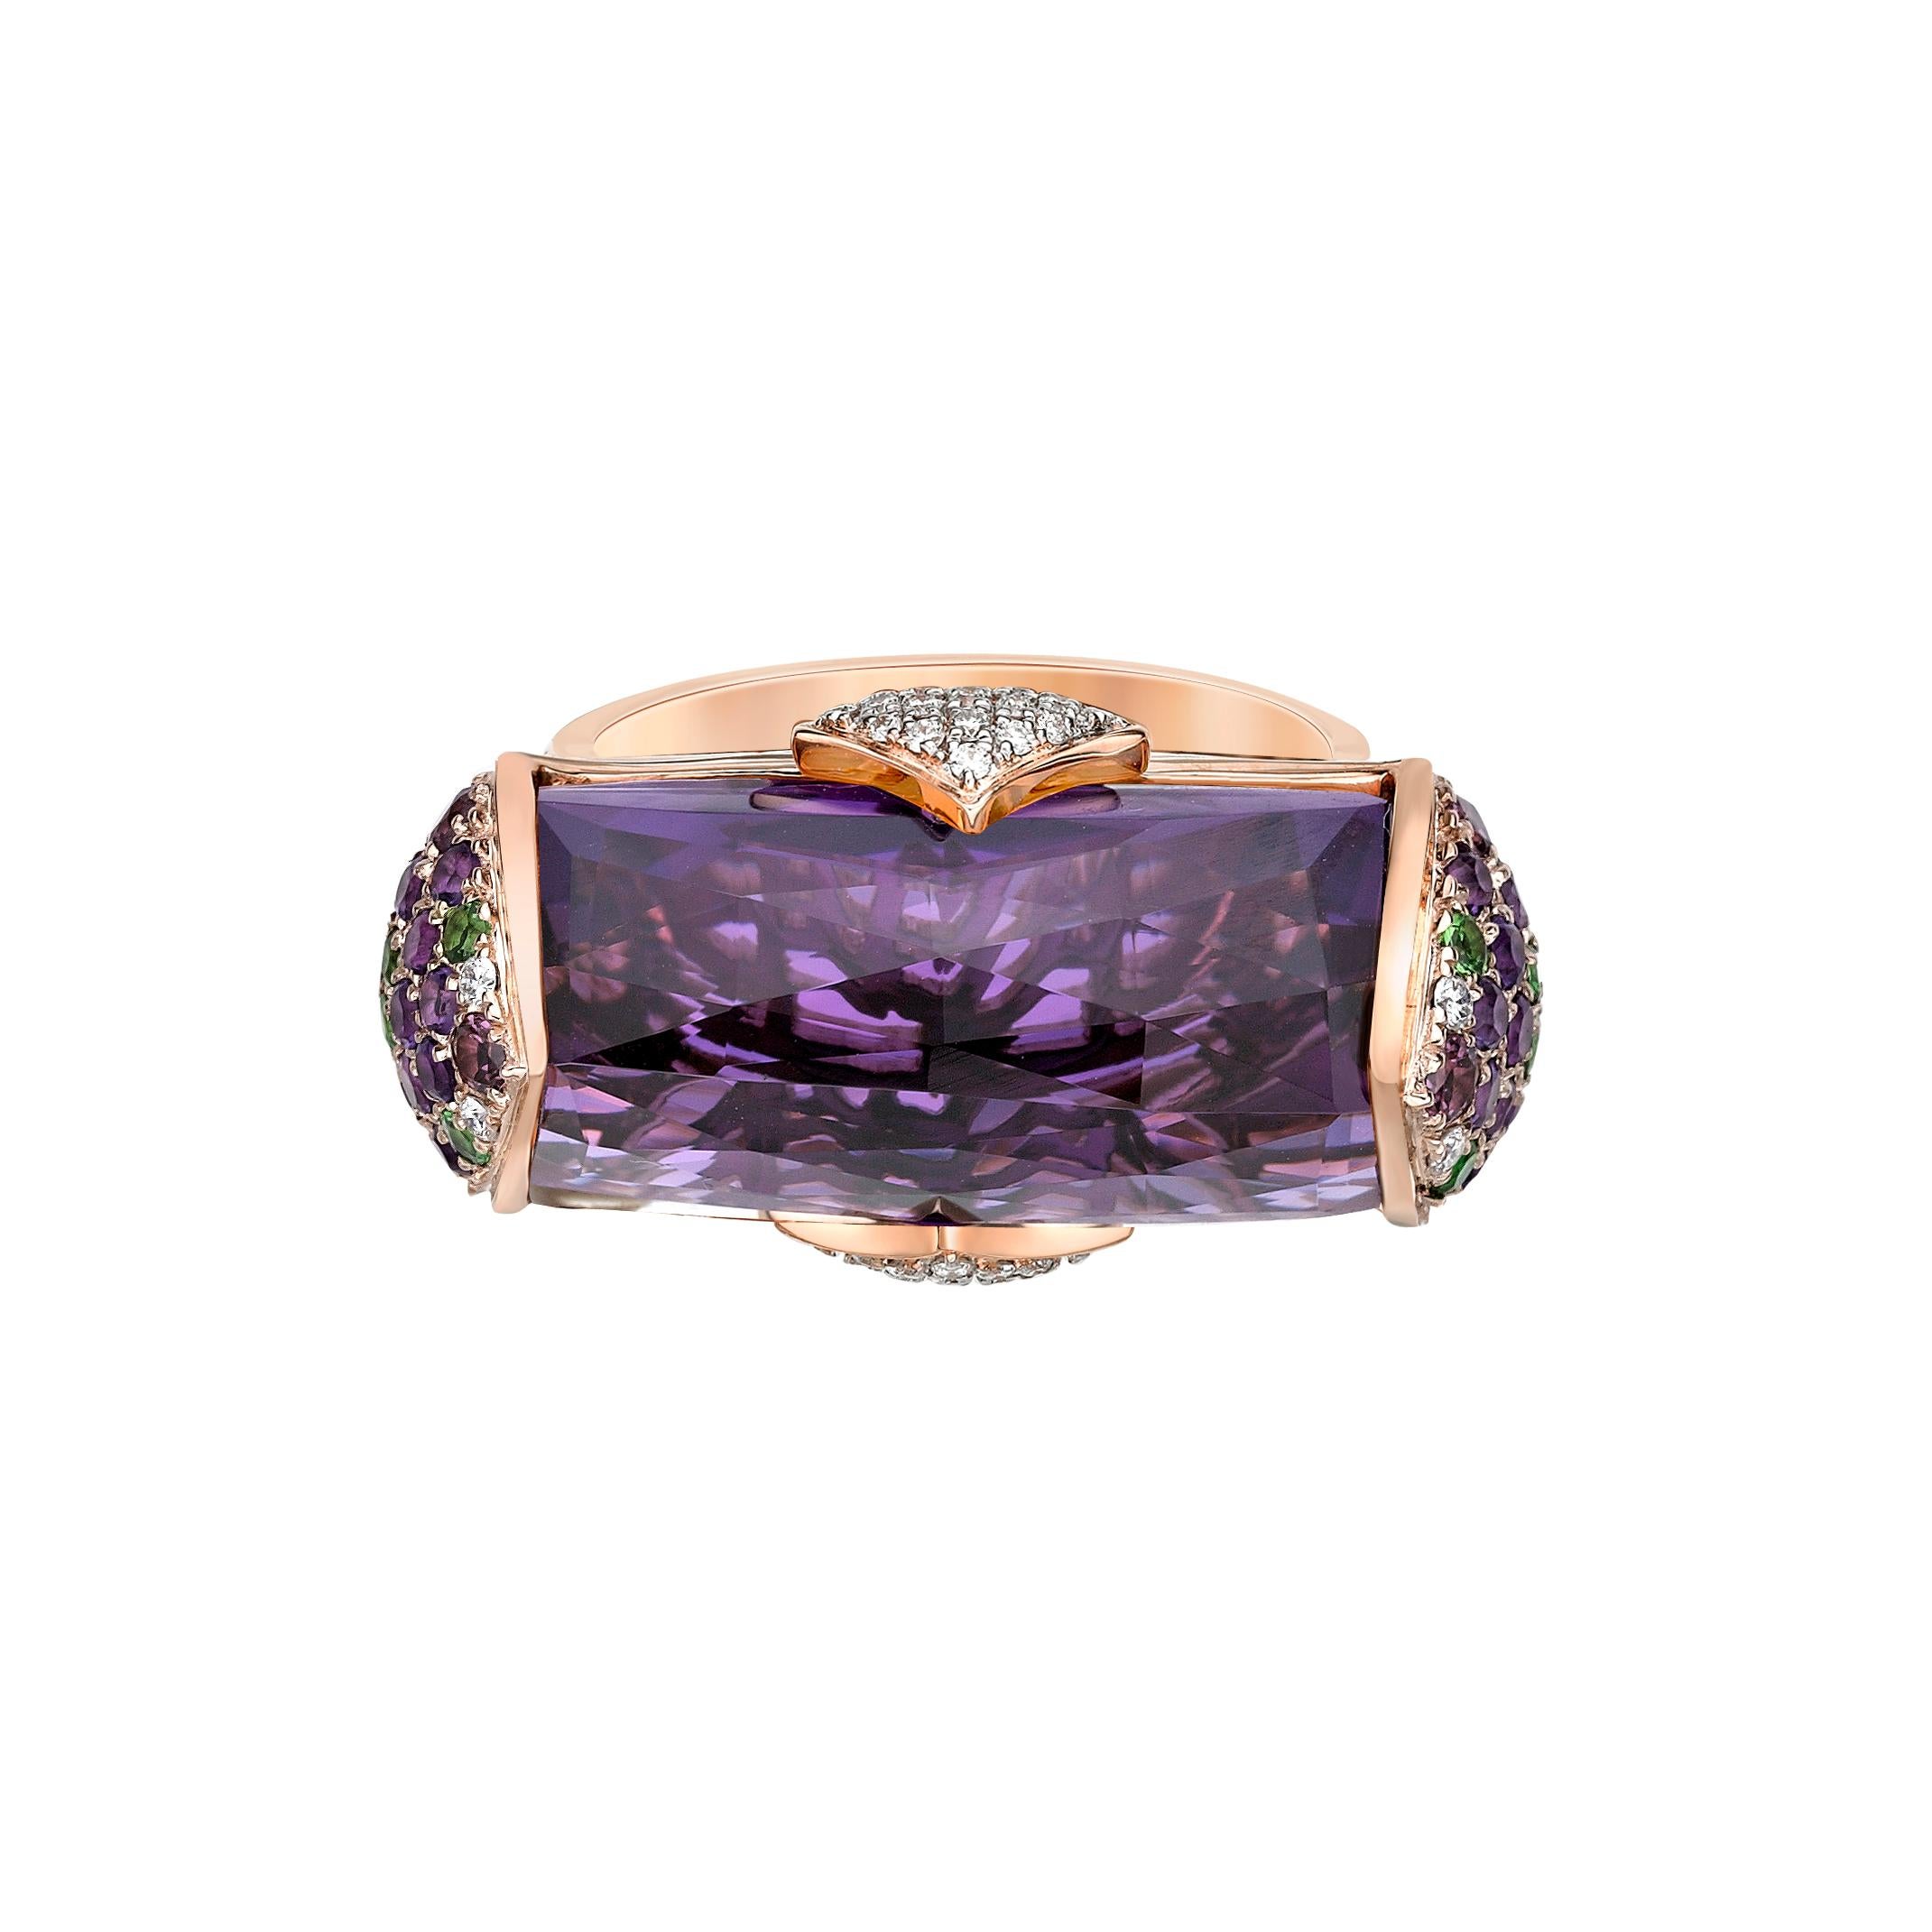 Contemporary 46 Carat Amethyst and Diamond Ring and Earring Set in 18 Karat Rose Gold For Sale